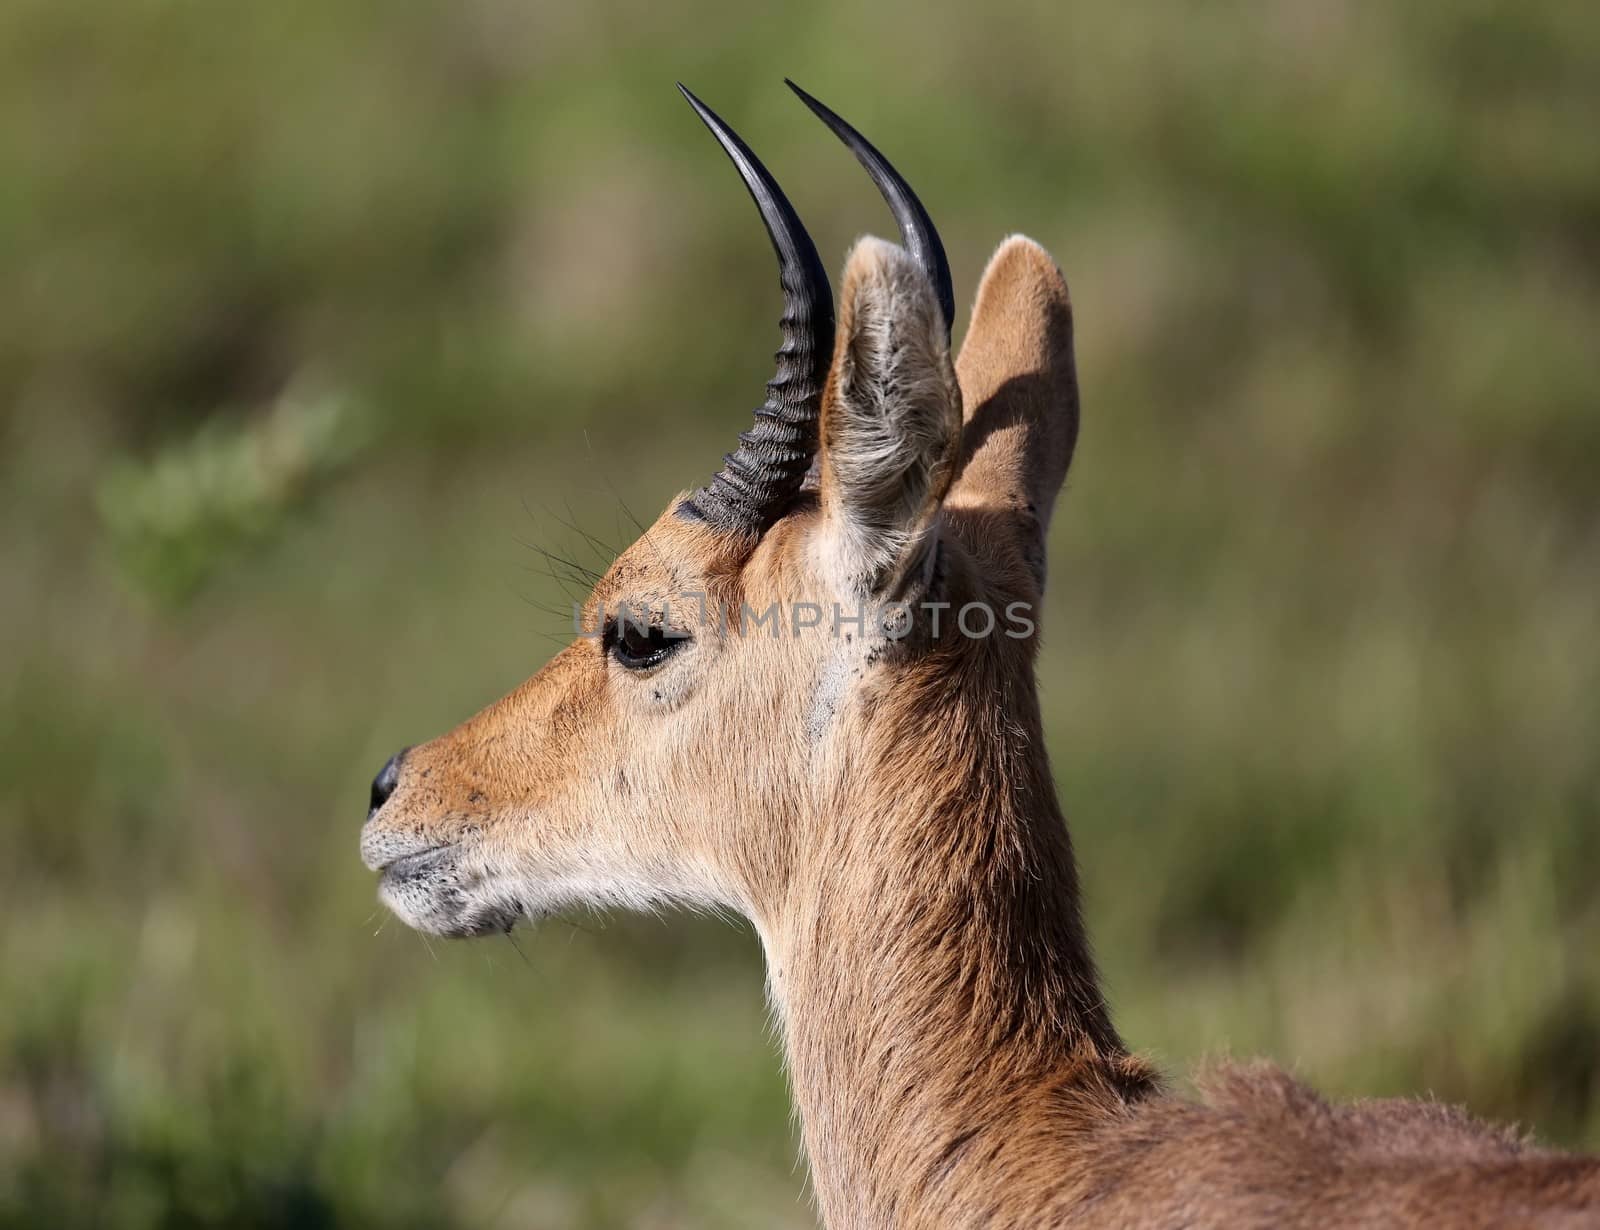 Mountain reedbuck antelope with curved black horns